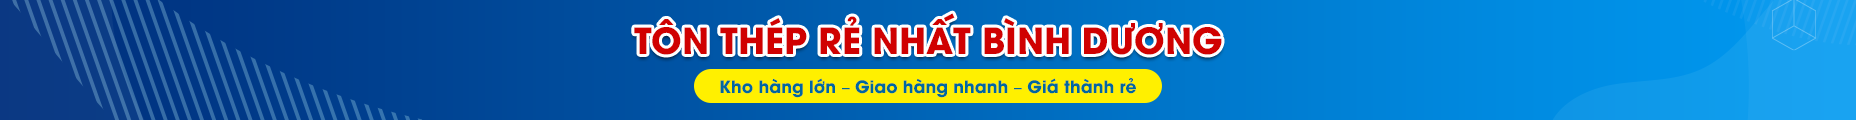 SẮT XÂY DỰNG